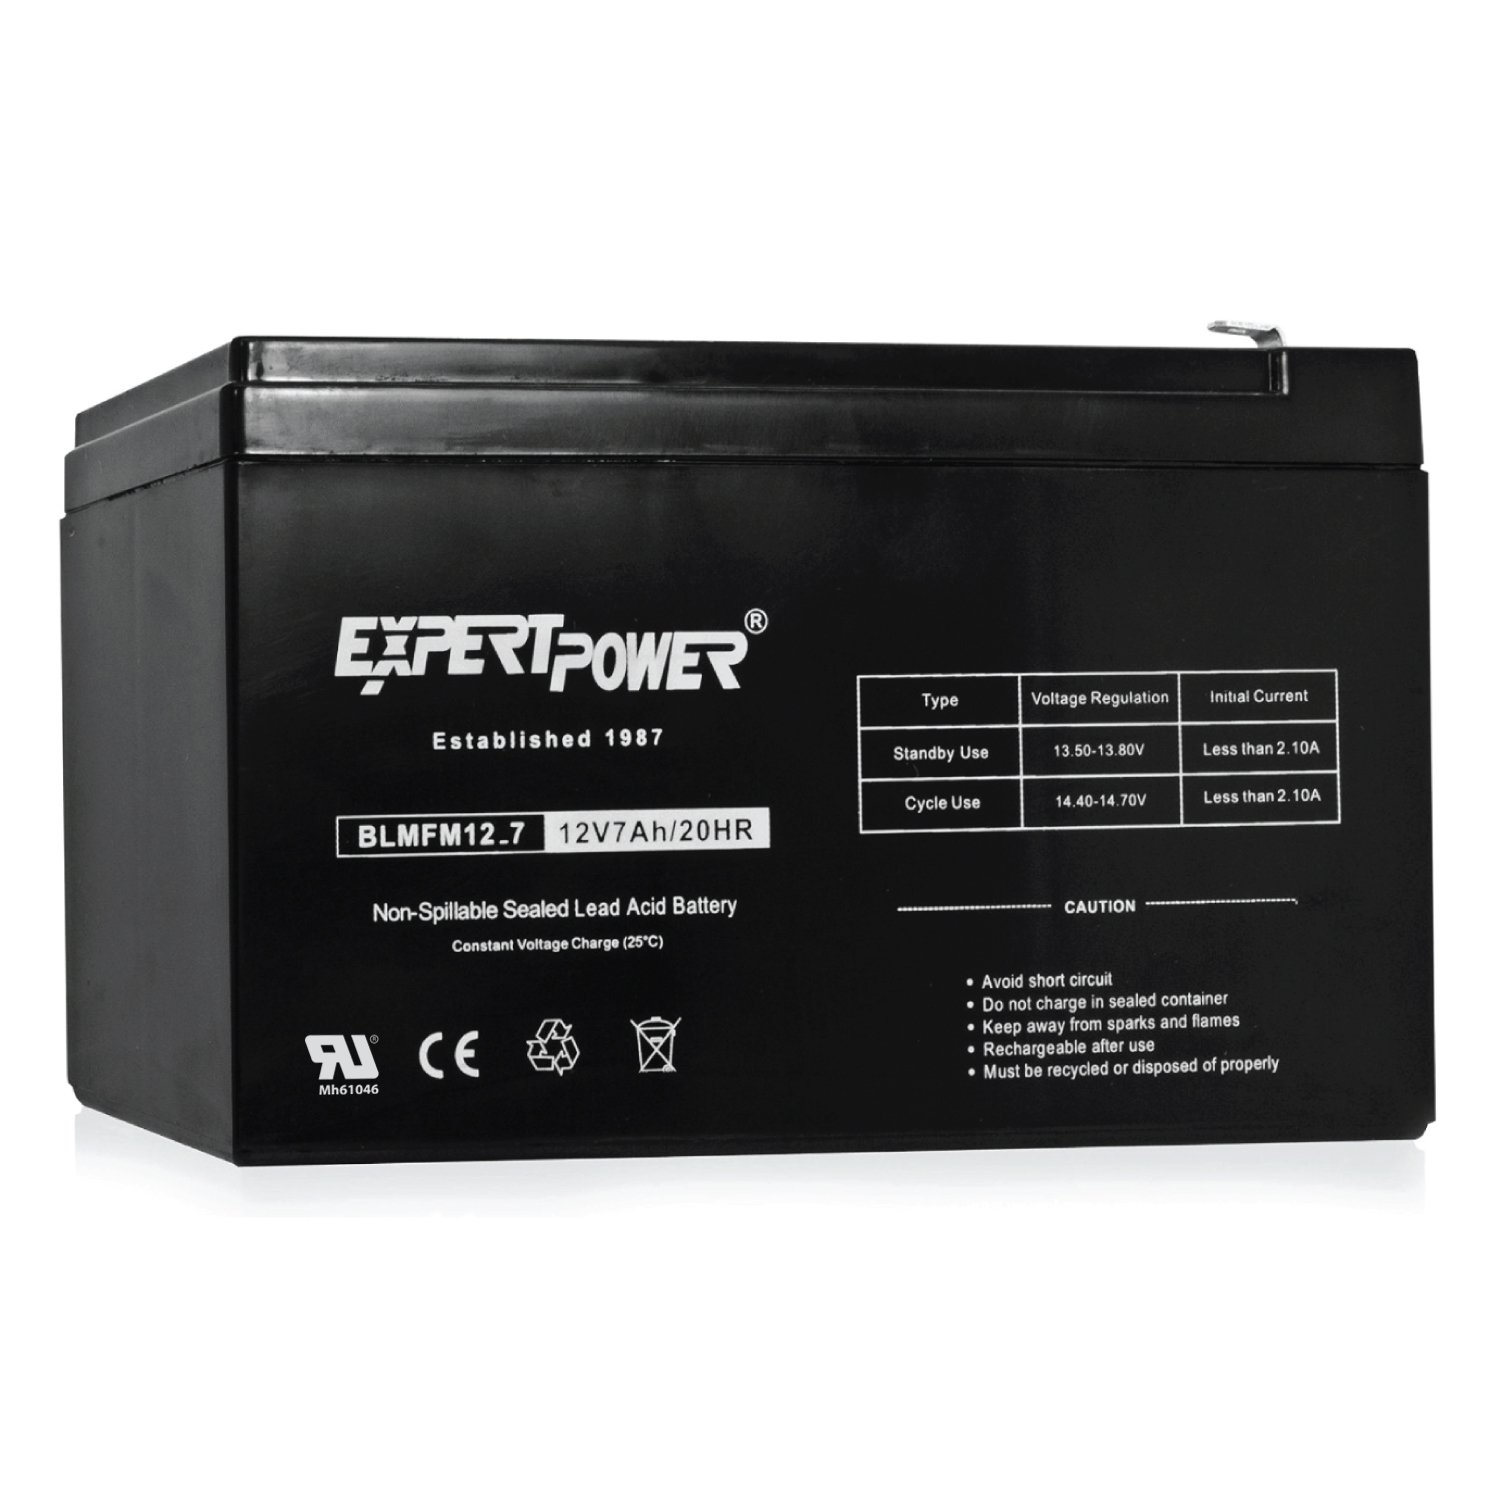 Garmin Striker Plus 4 with Dual-Beam transducer, 010-01870-00 & ExpertPower 12v 7ah Rechargeable Sealed Lead Acid Battery